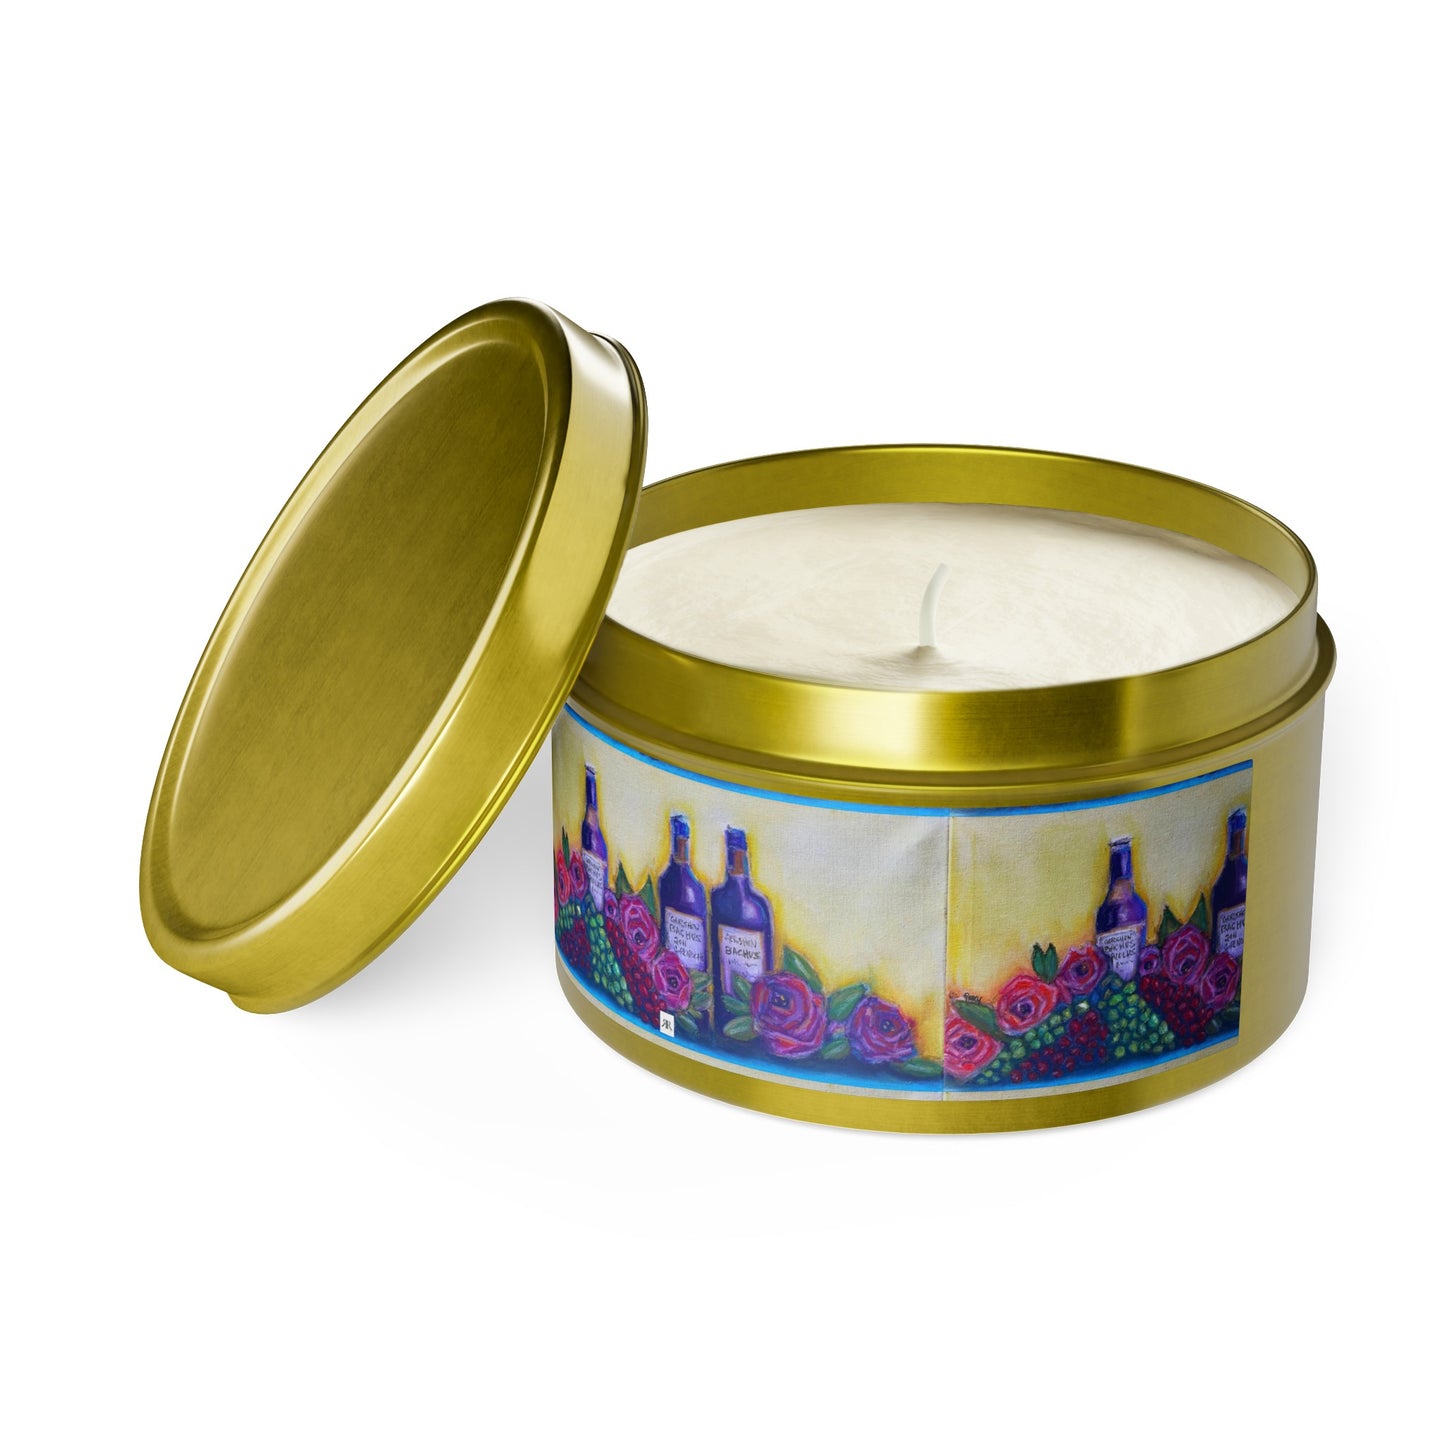 GBV Wine and Roses Tin Candle